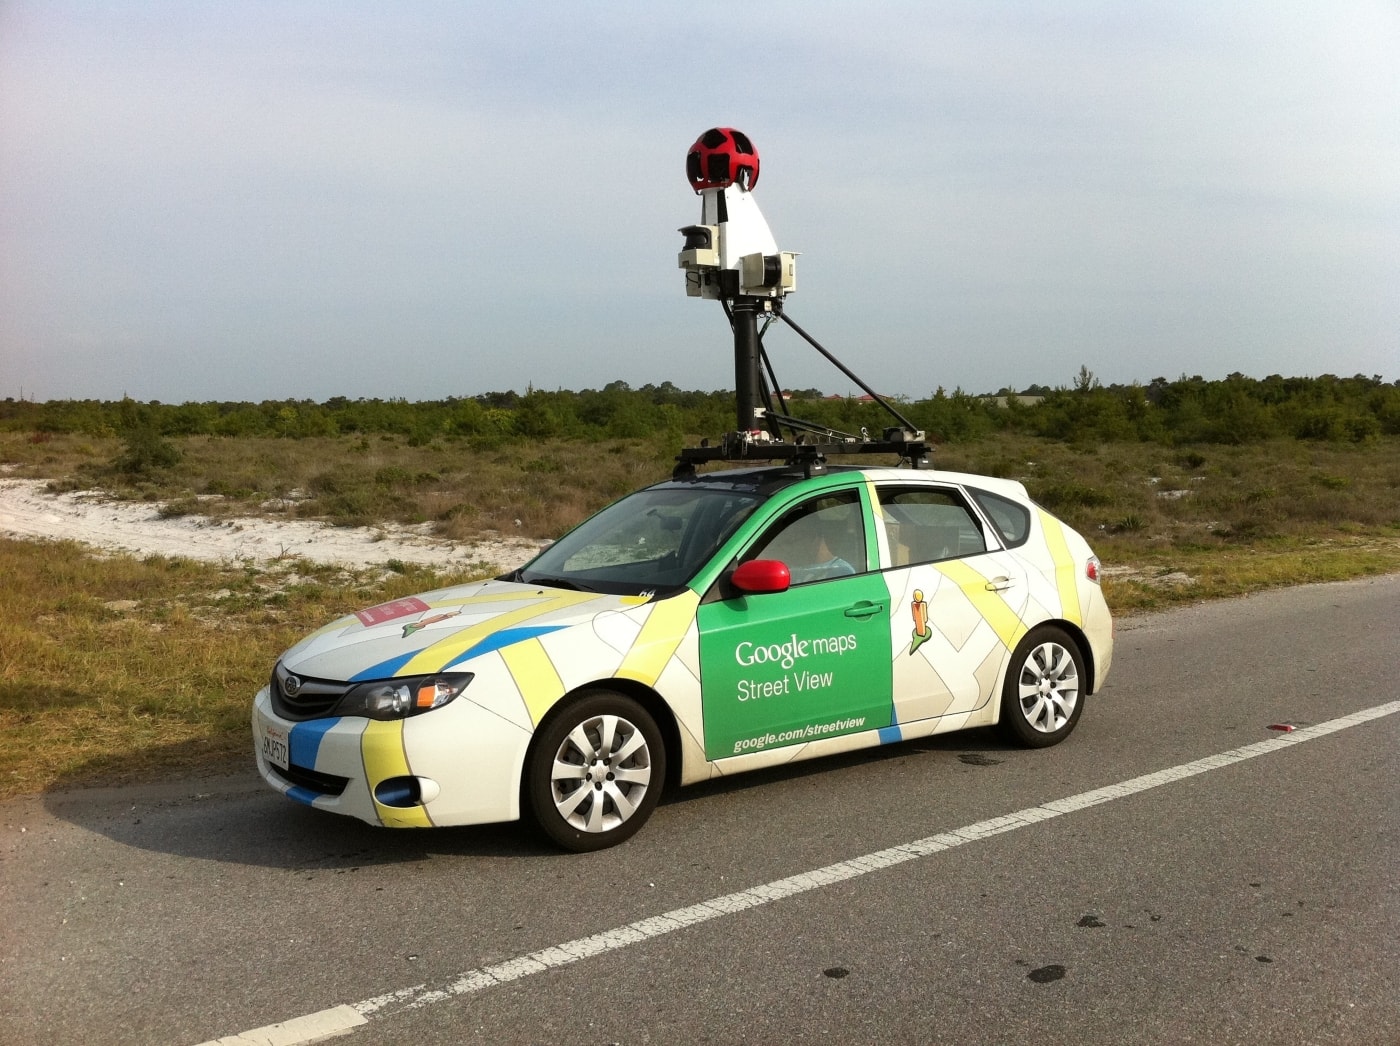 Google Street View Cars Will Monitor Air Quality in London autoevolution